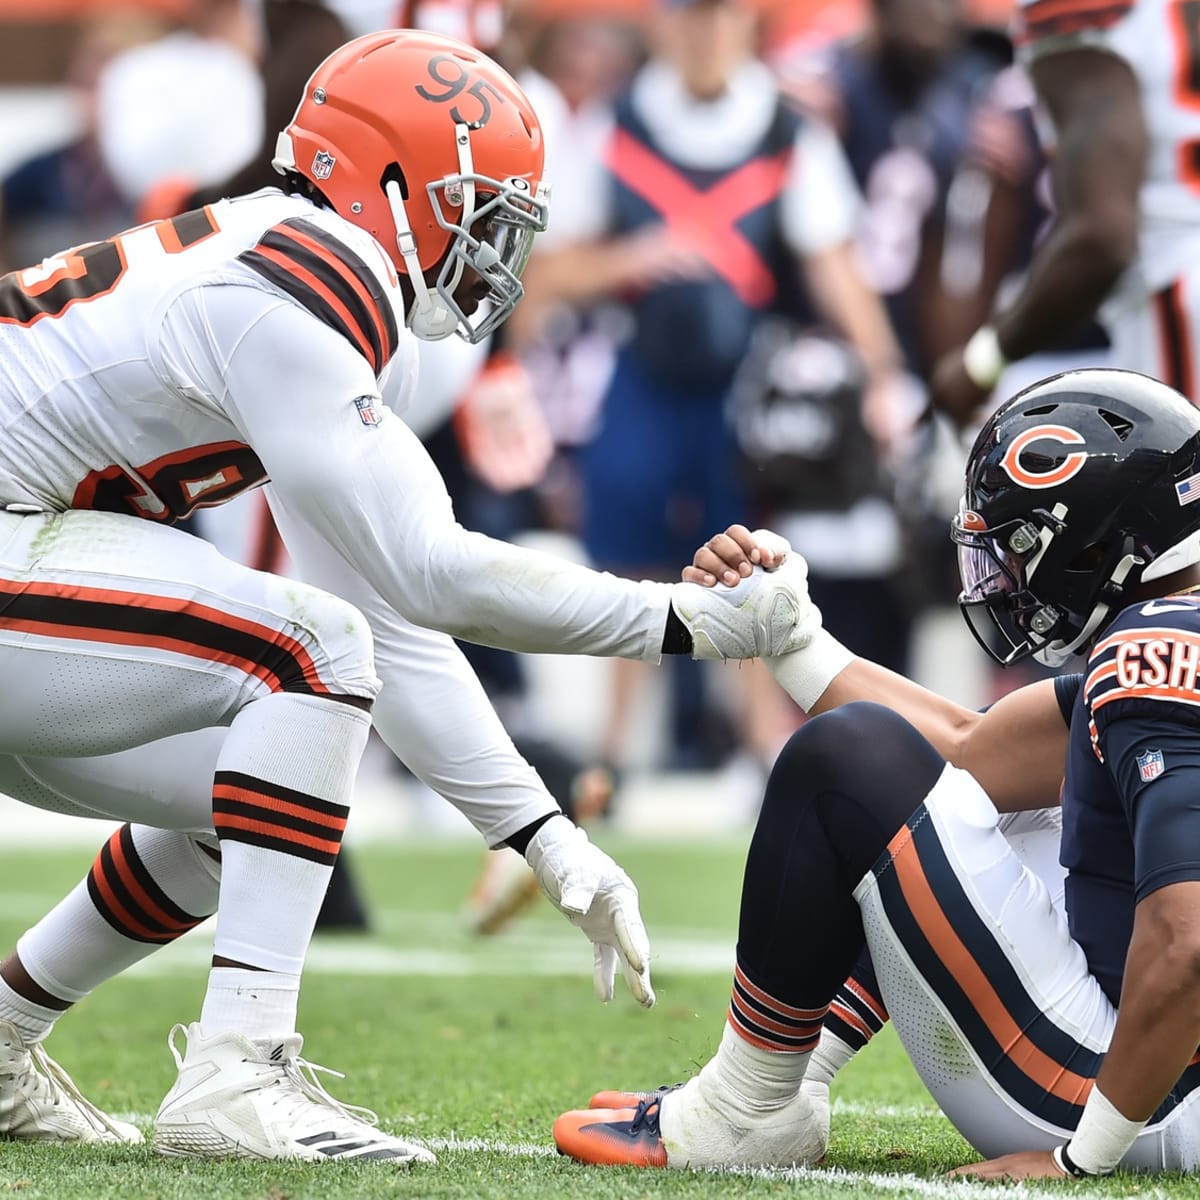 Shipley's Myles Garrett Ruins Justin Fields' Debut and More Thoughts on Week 3 - Sports Illustrated Jaguars Analysis and More